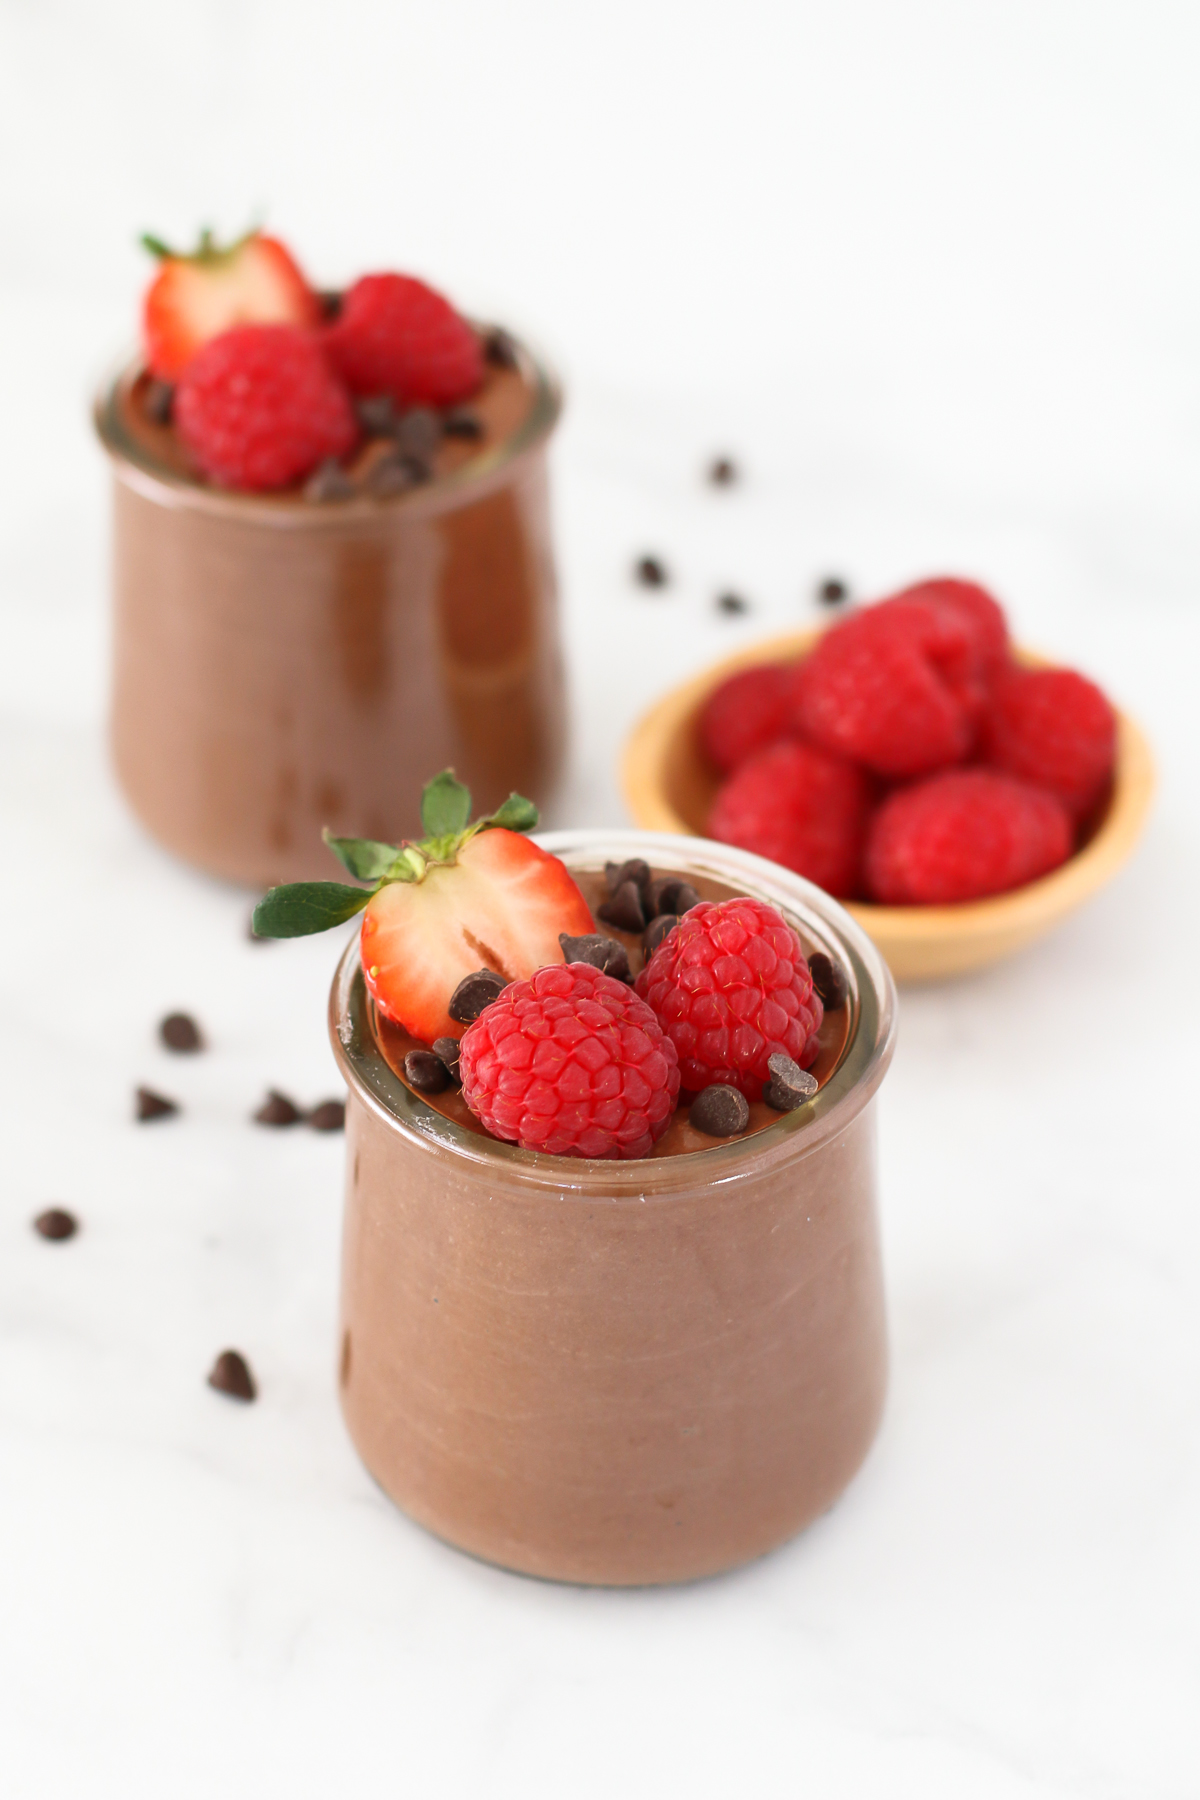 Chocolate chia mousse. This healthy, dairy free dessert comes together in just minutes. Top with your favorite fresh berries!